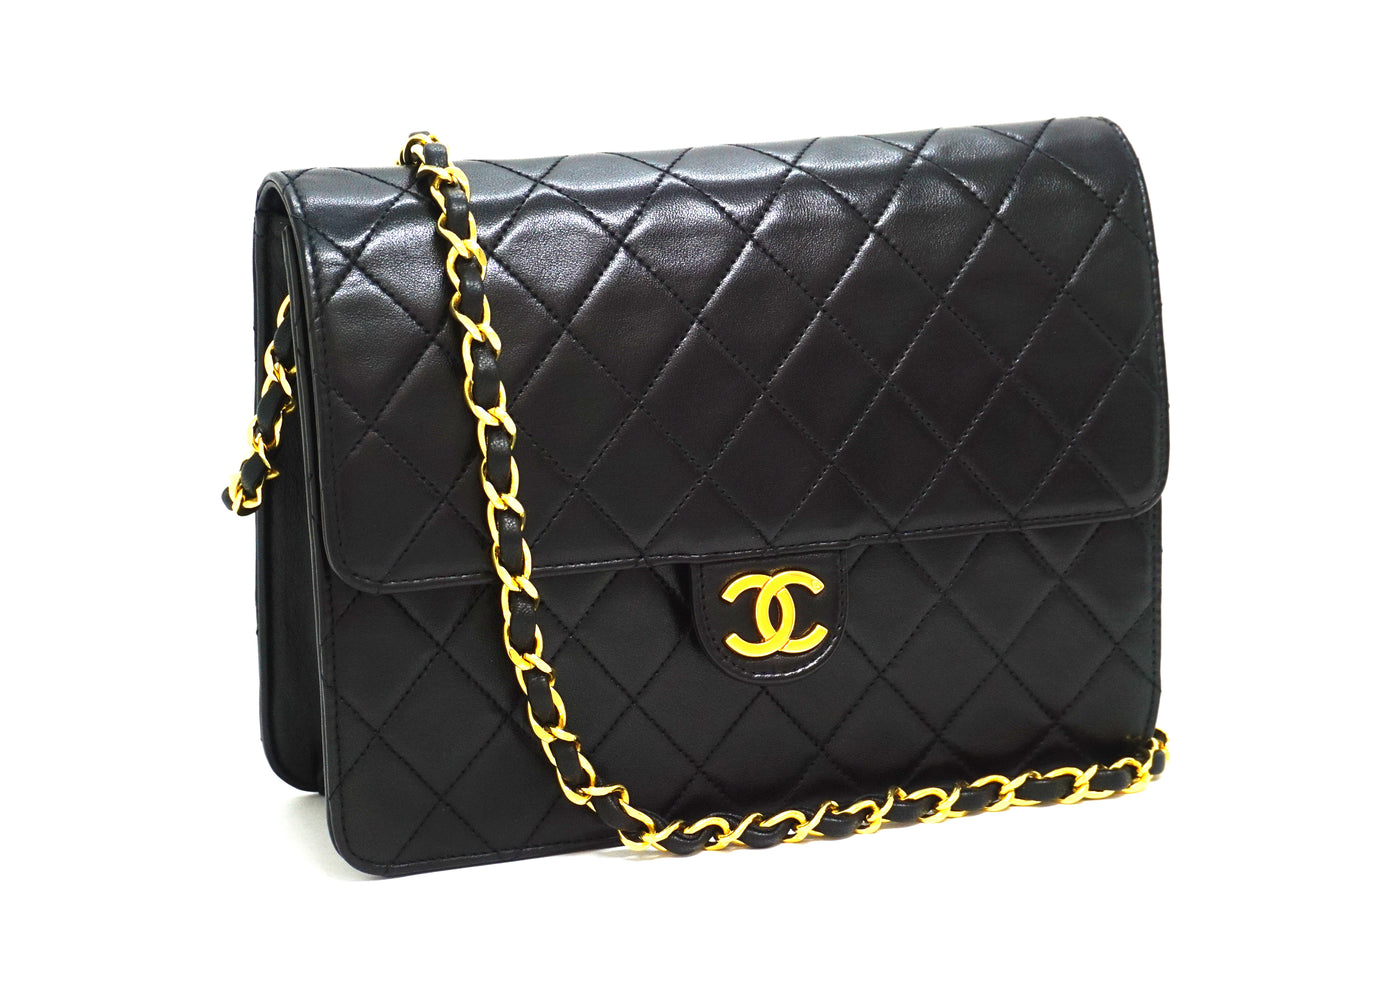 Just got the vintage Chanel classic flap with 24k gold hardware of